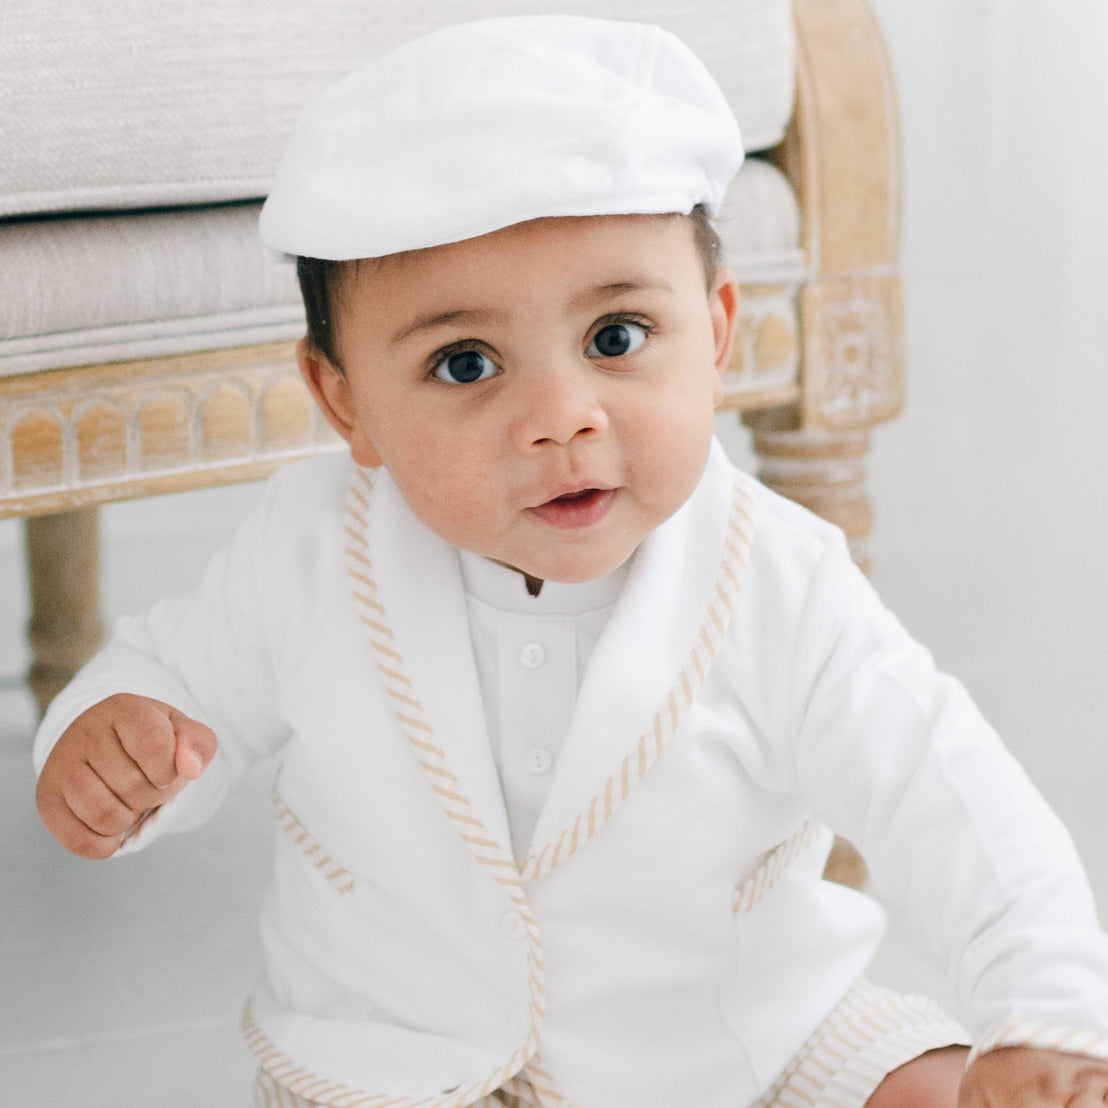 Baby boy wearing the Theodore 3-Piece Suit in tan.